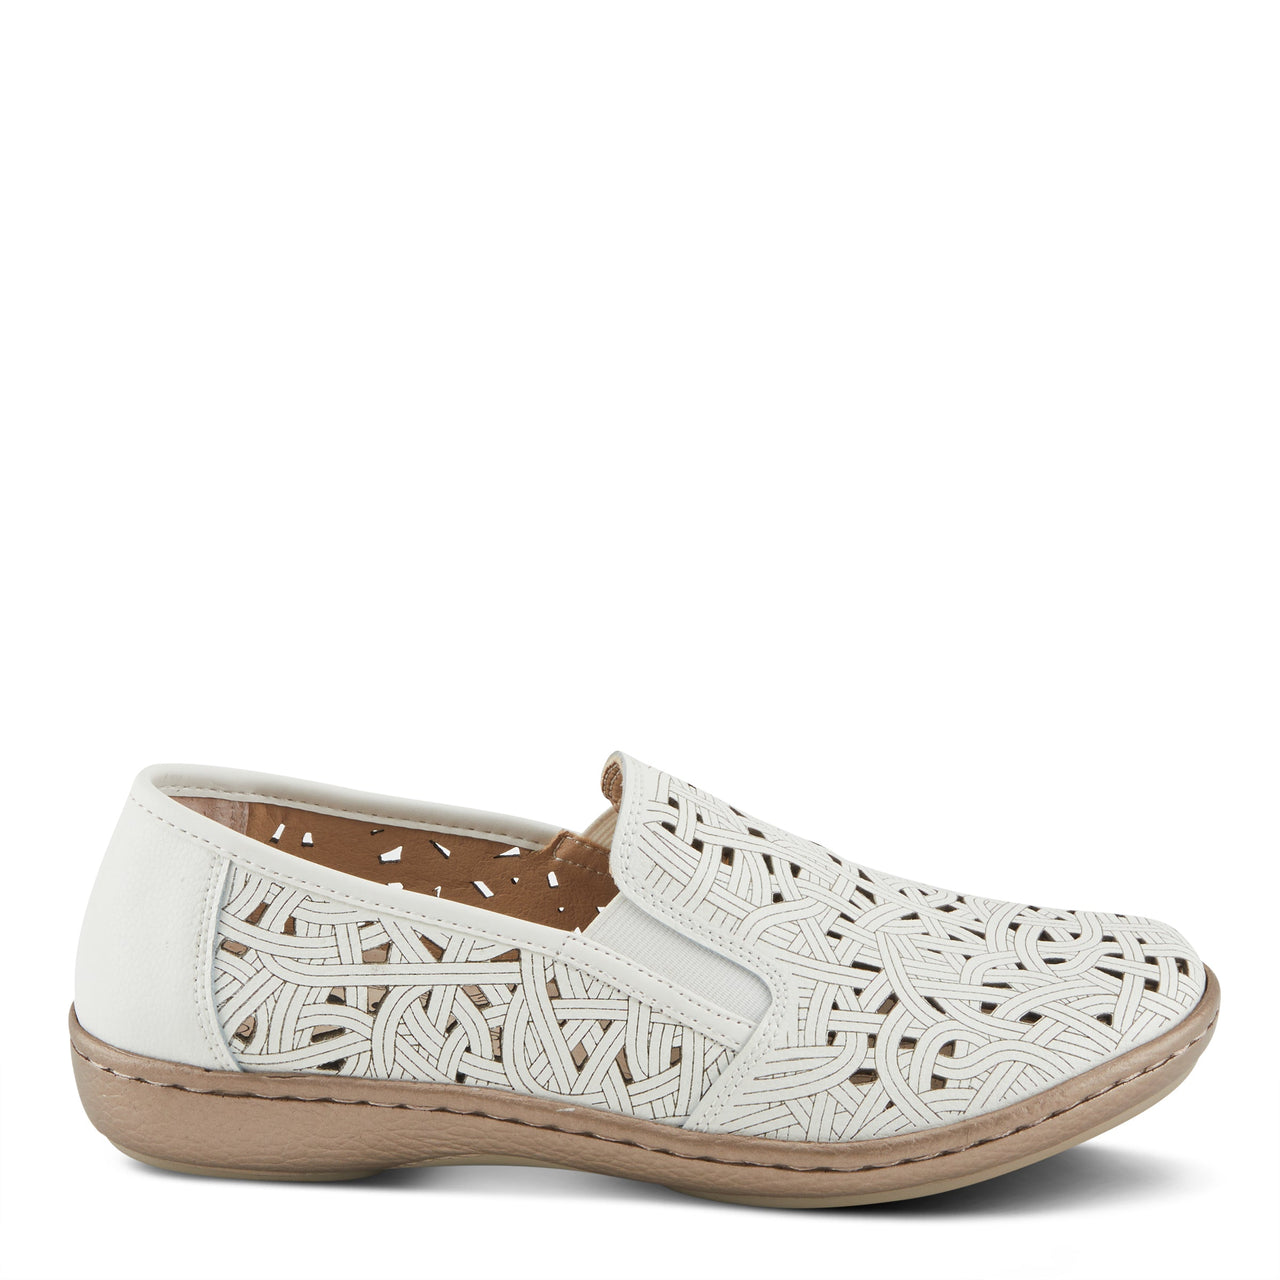 Spring Step Nifonela Shoes in taupe leather with decorative buckle